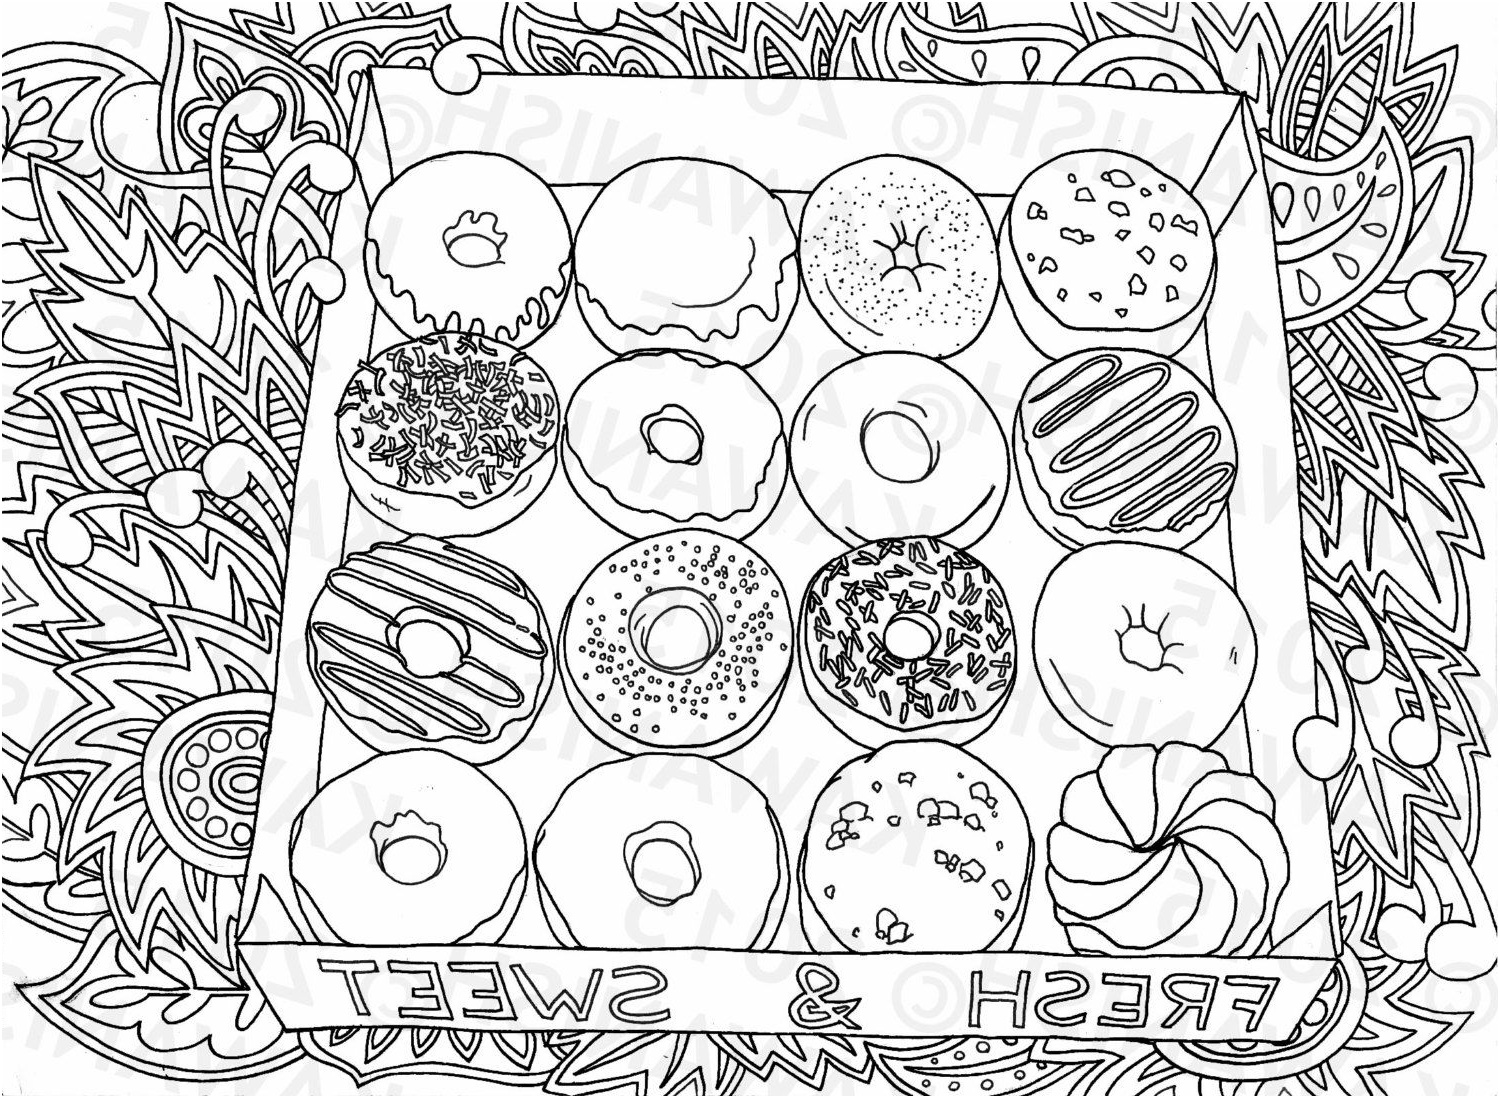 Coloriage Kawaii Donuts Luxe Donuts Doughnuts Adult Coloring Page T Wall Art by